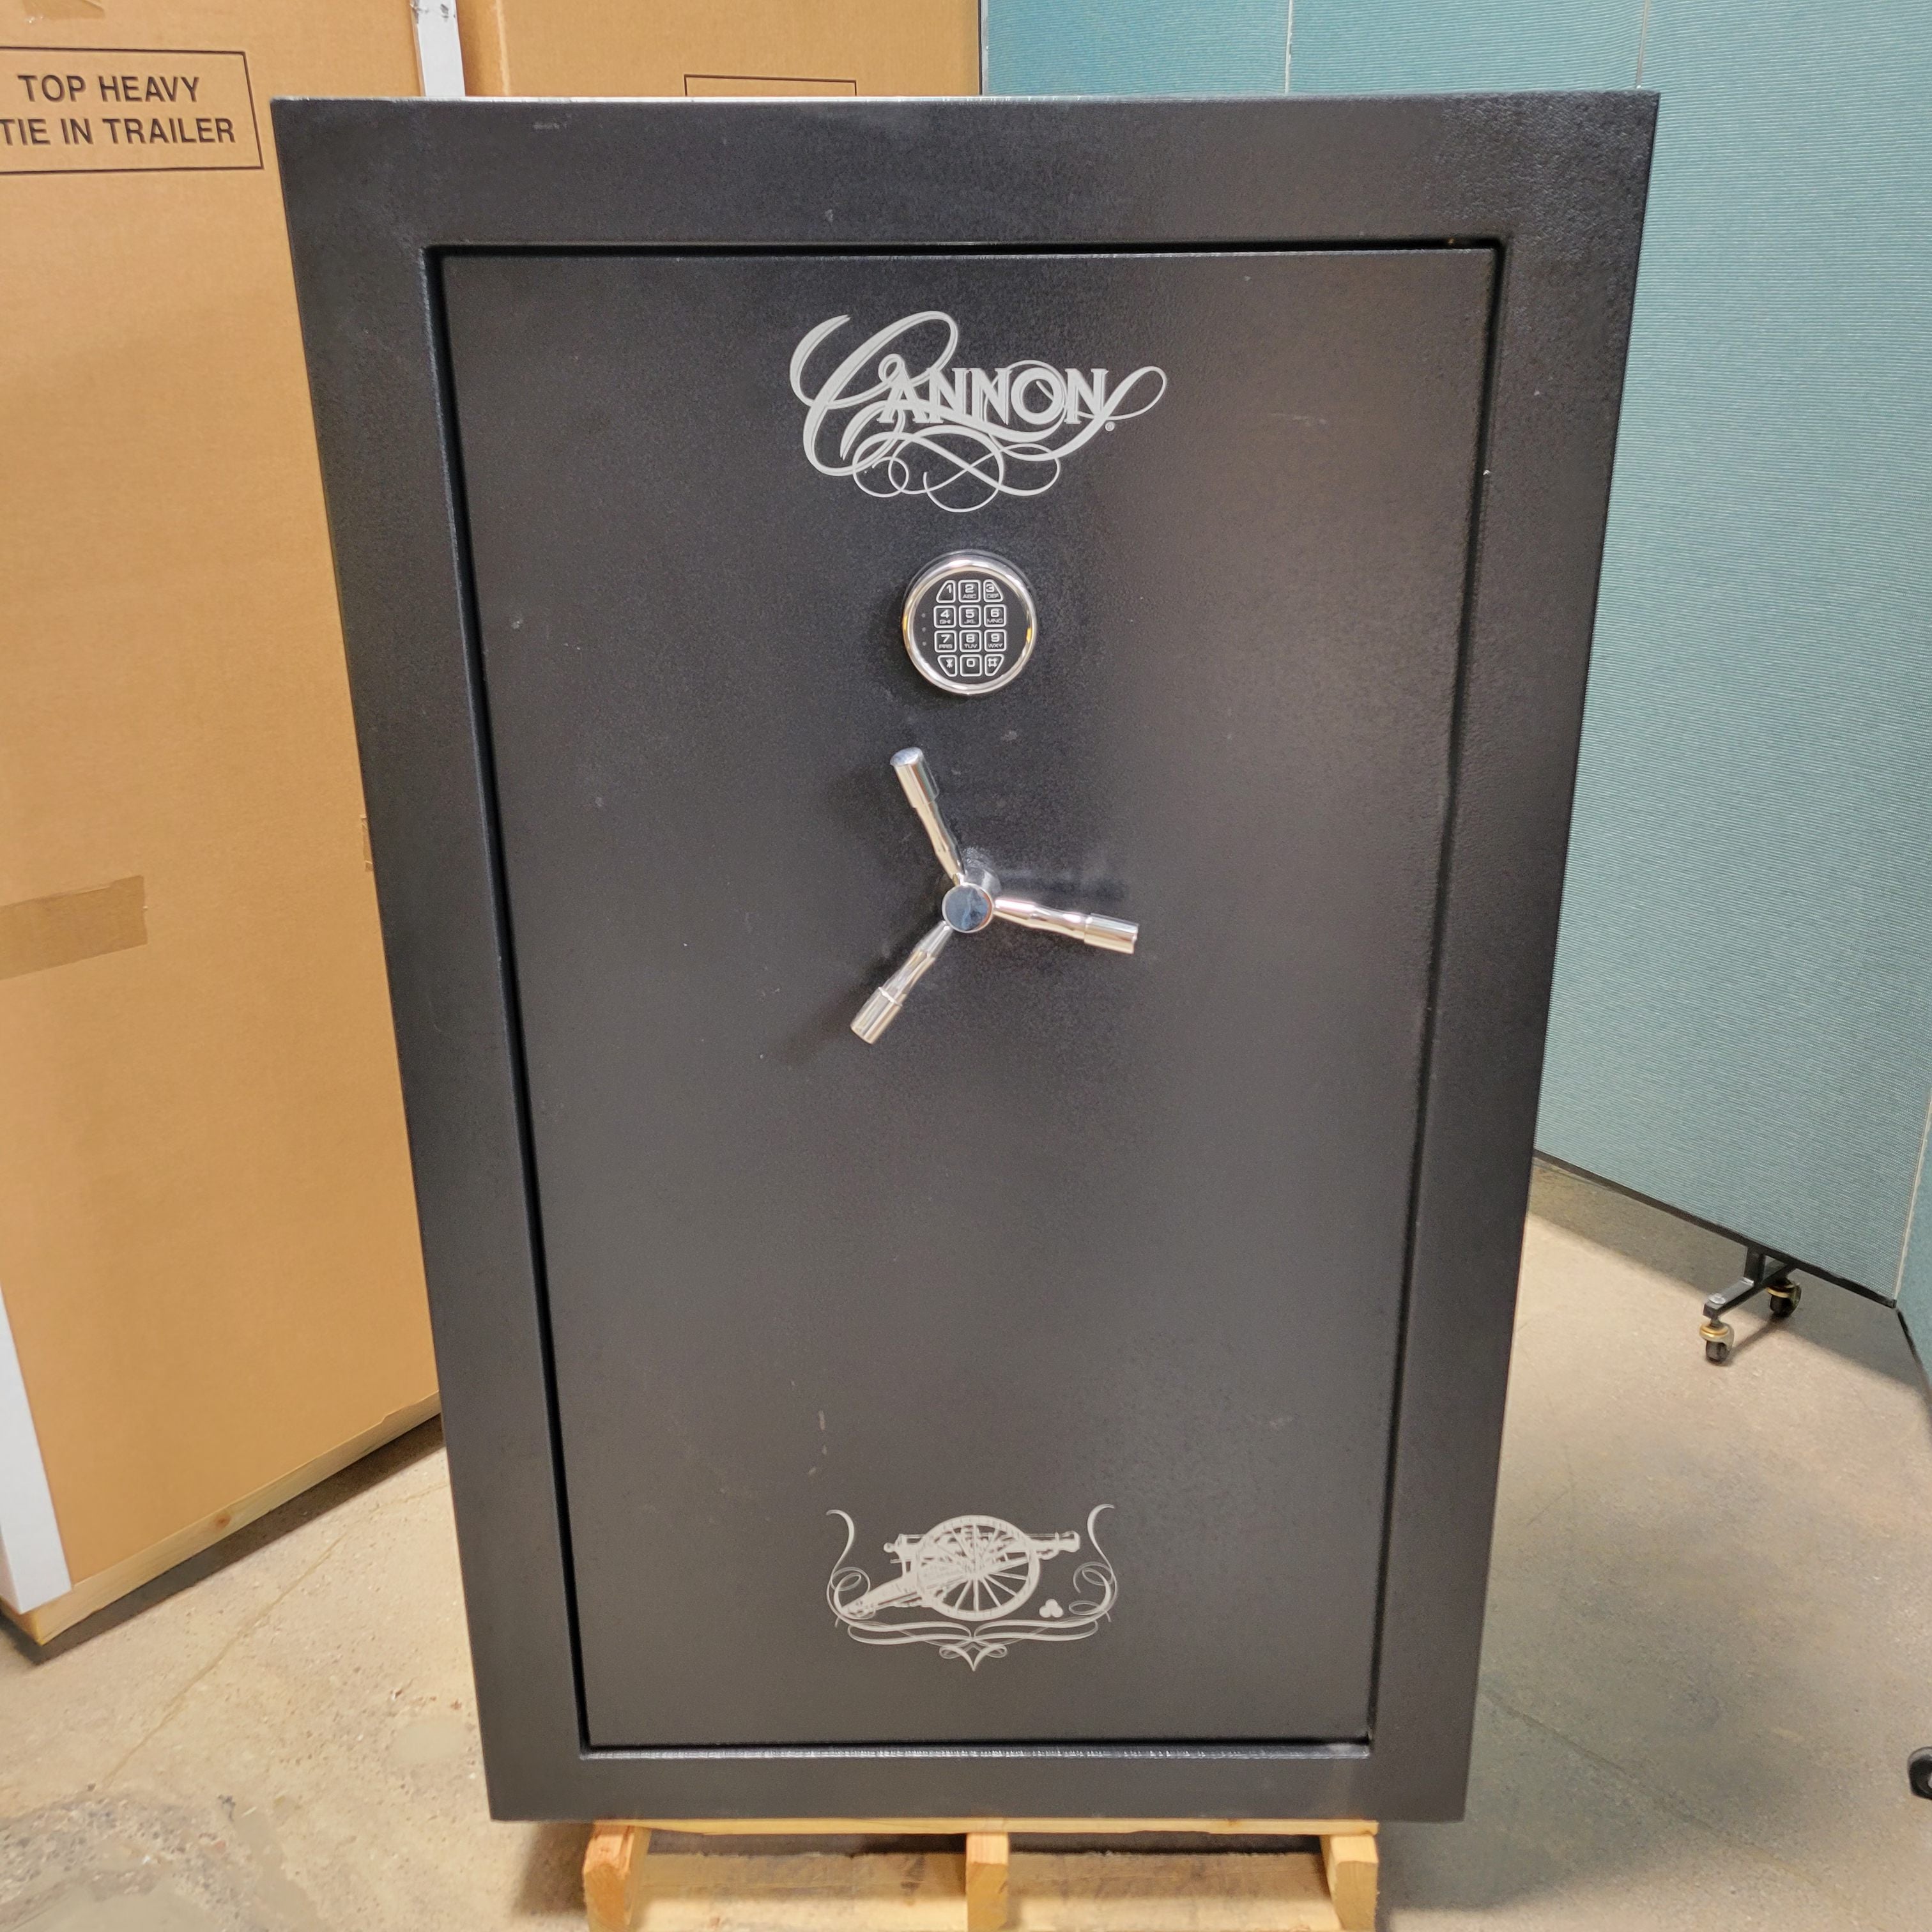 Used Cannon TS5735 Gun Safe, image 1 